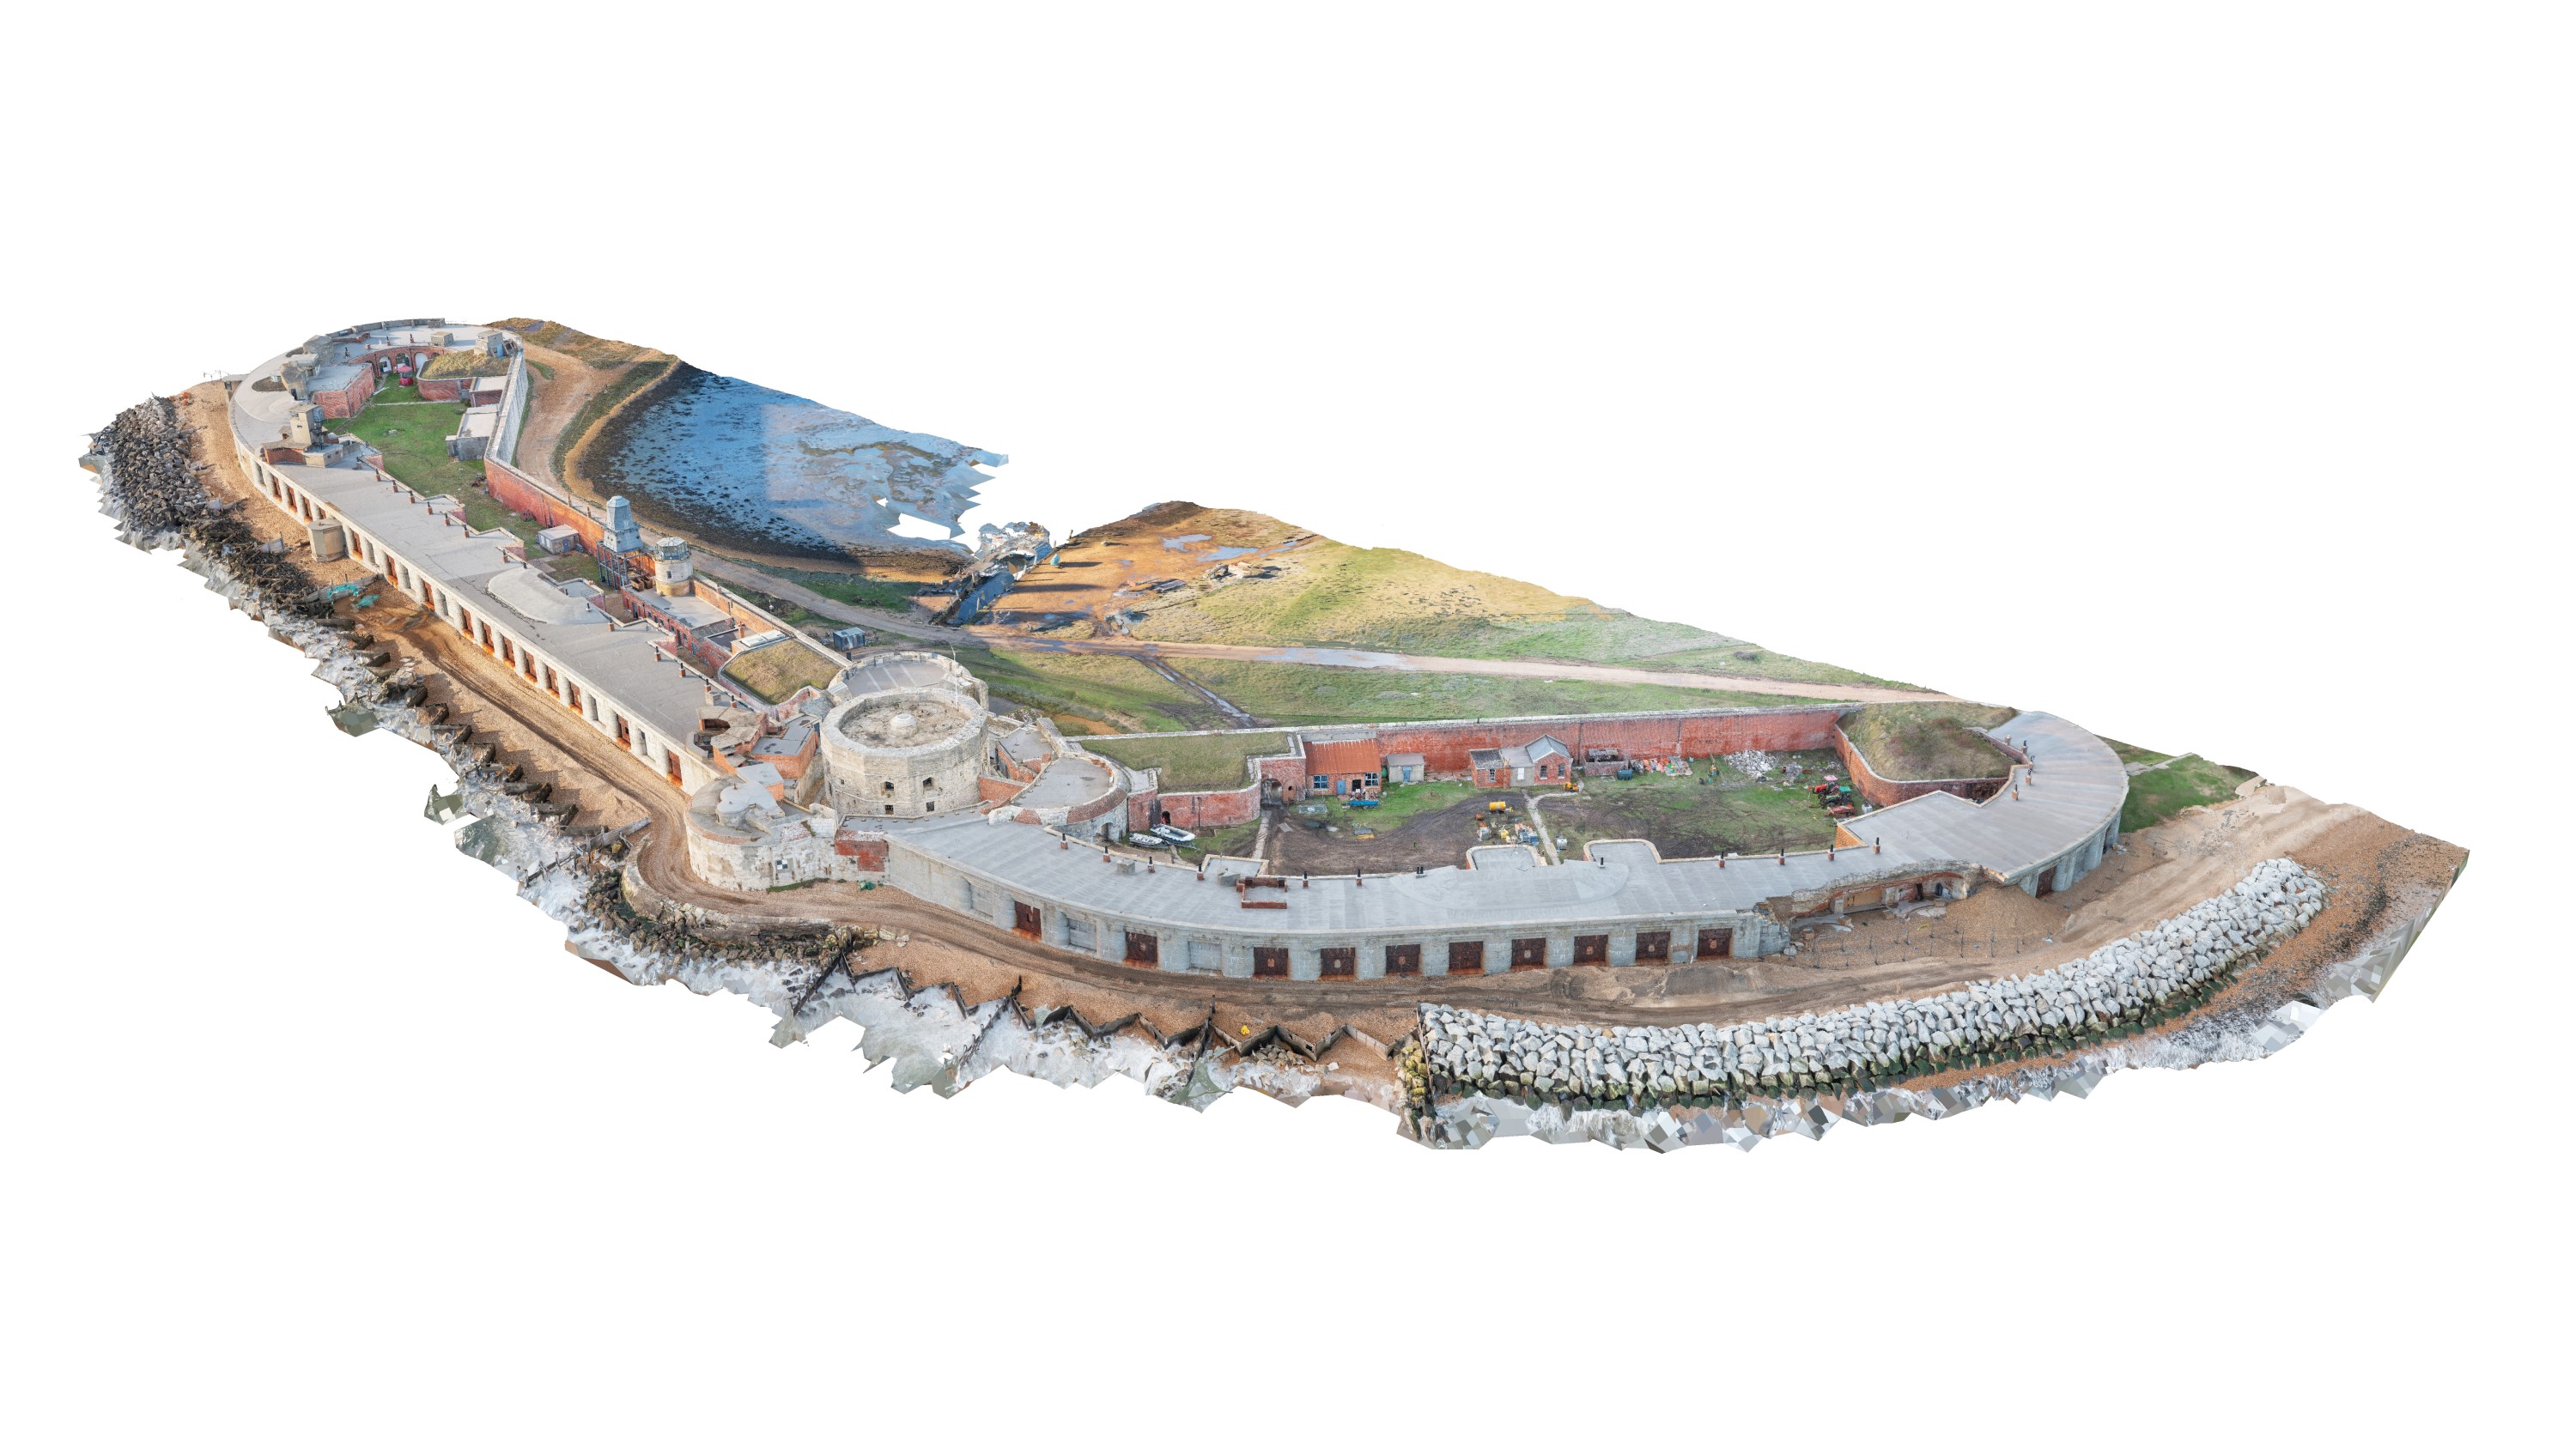 Image: A 3D model of Hurst Castle created using data from laser scanning and digital photogrammetry